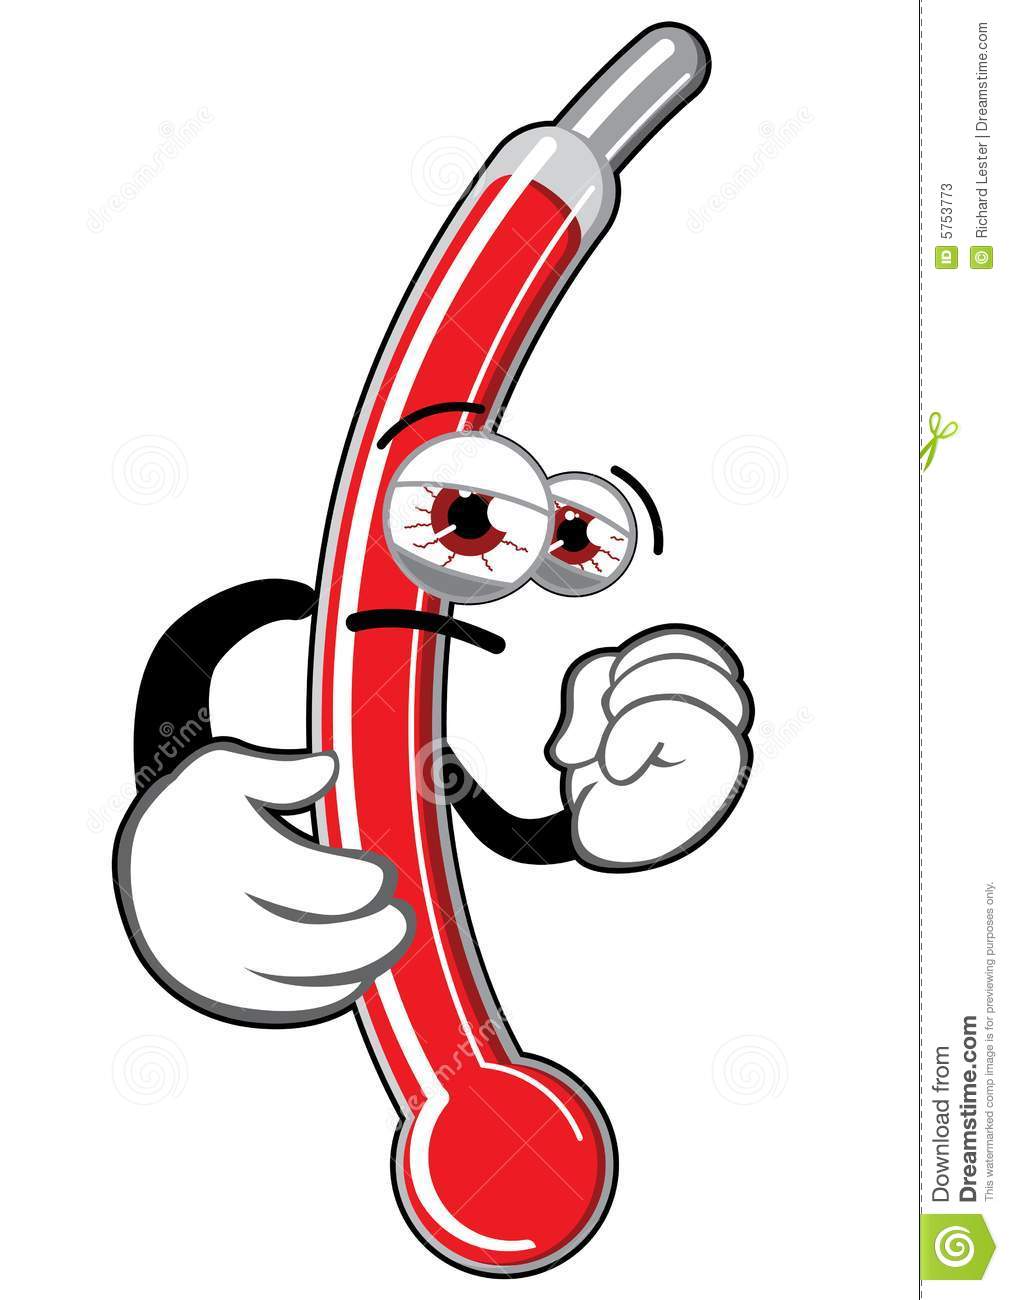 Hot Thermometer Clip Art Sick Thermometer 5753773 Jpg